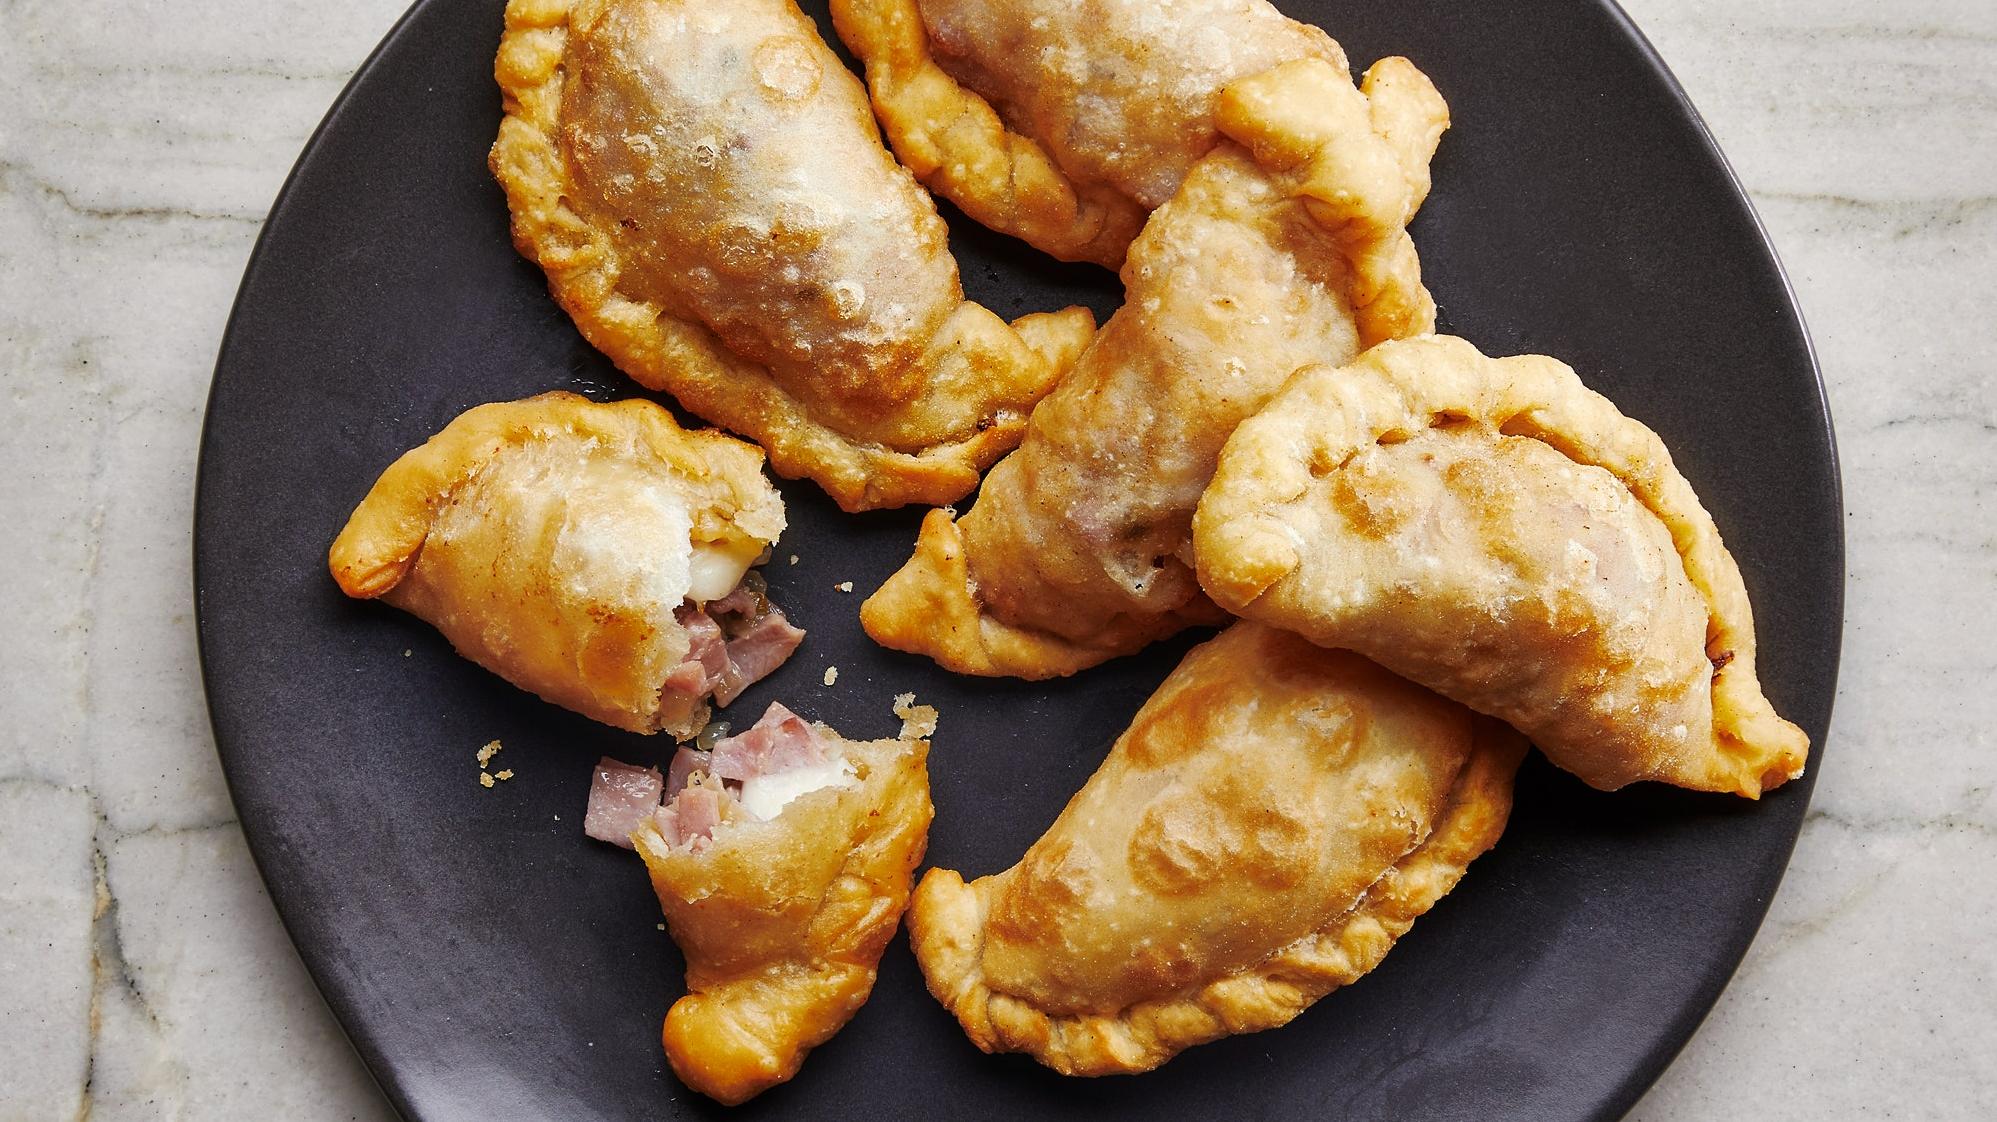  These crispy pastry pockets are filled with salty ham and gooey cheese - a match made in heaven!